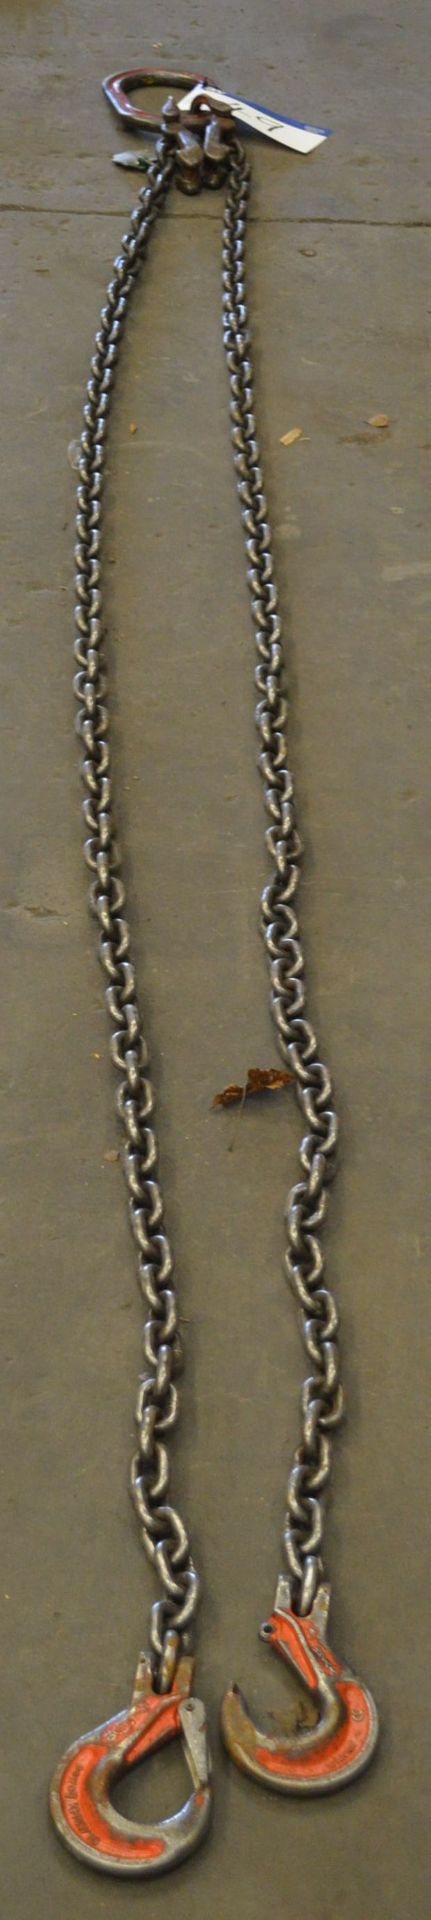 Pewag Two Leg Chain Sling, approx. 2.8m long, with tensioners